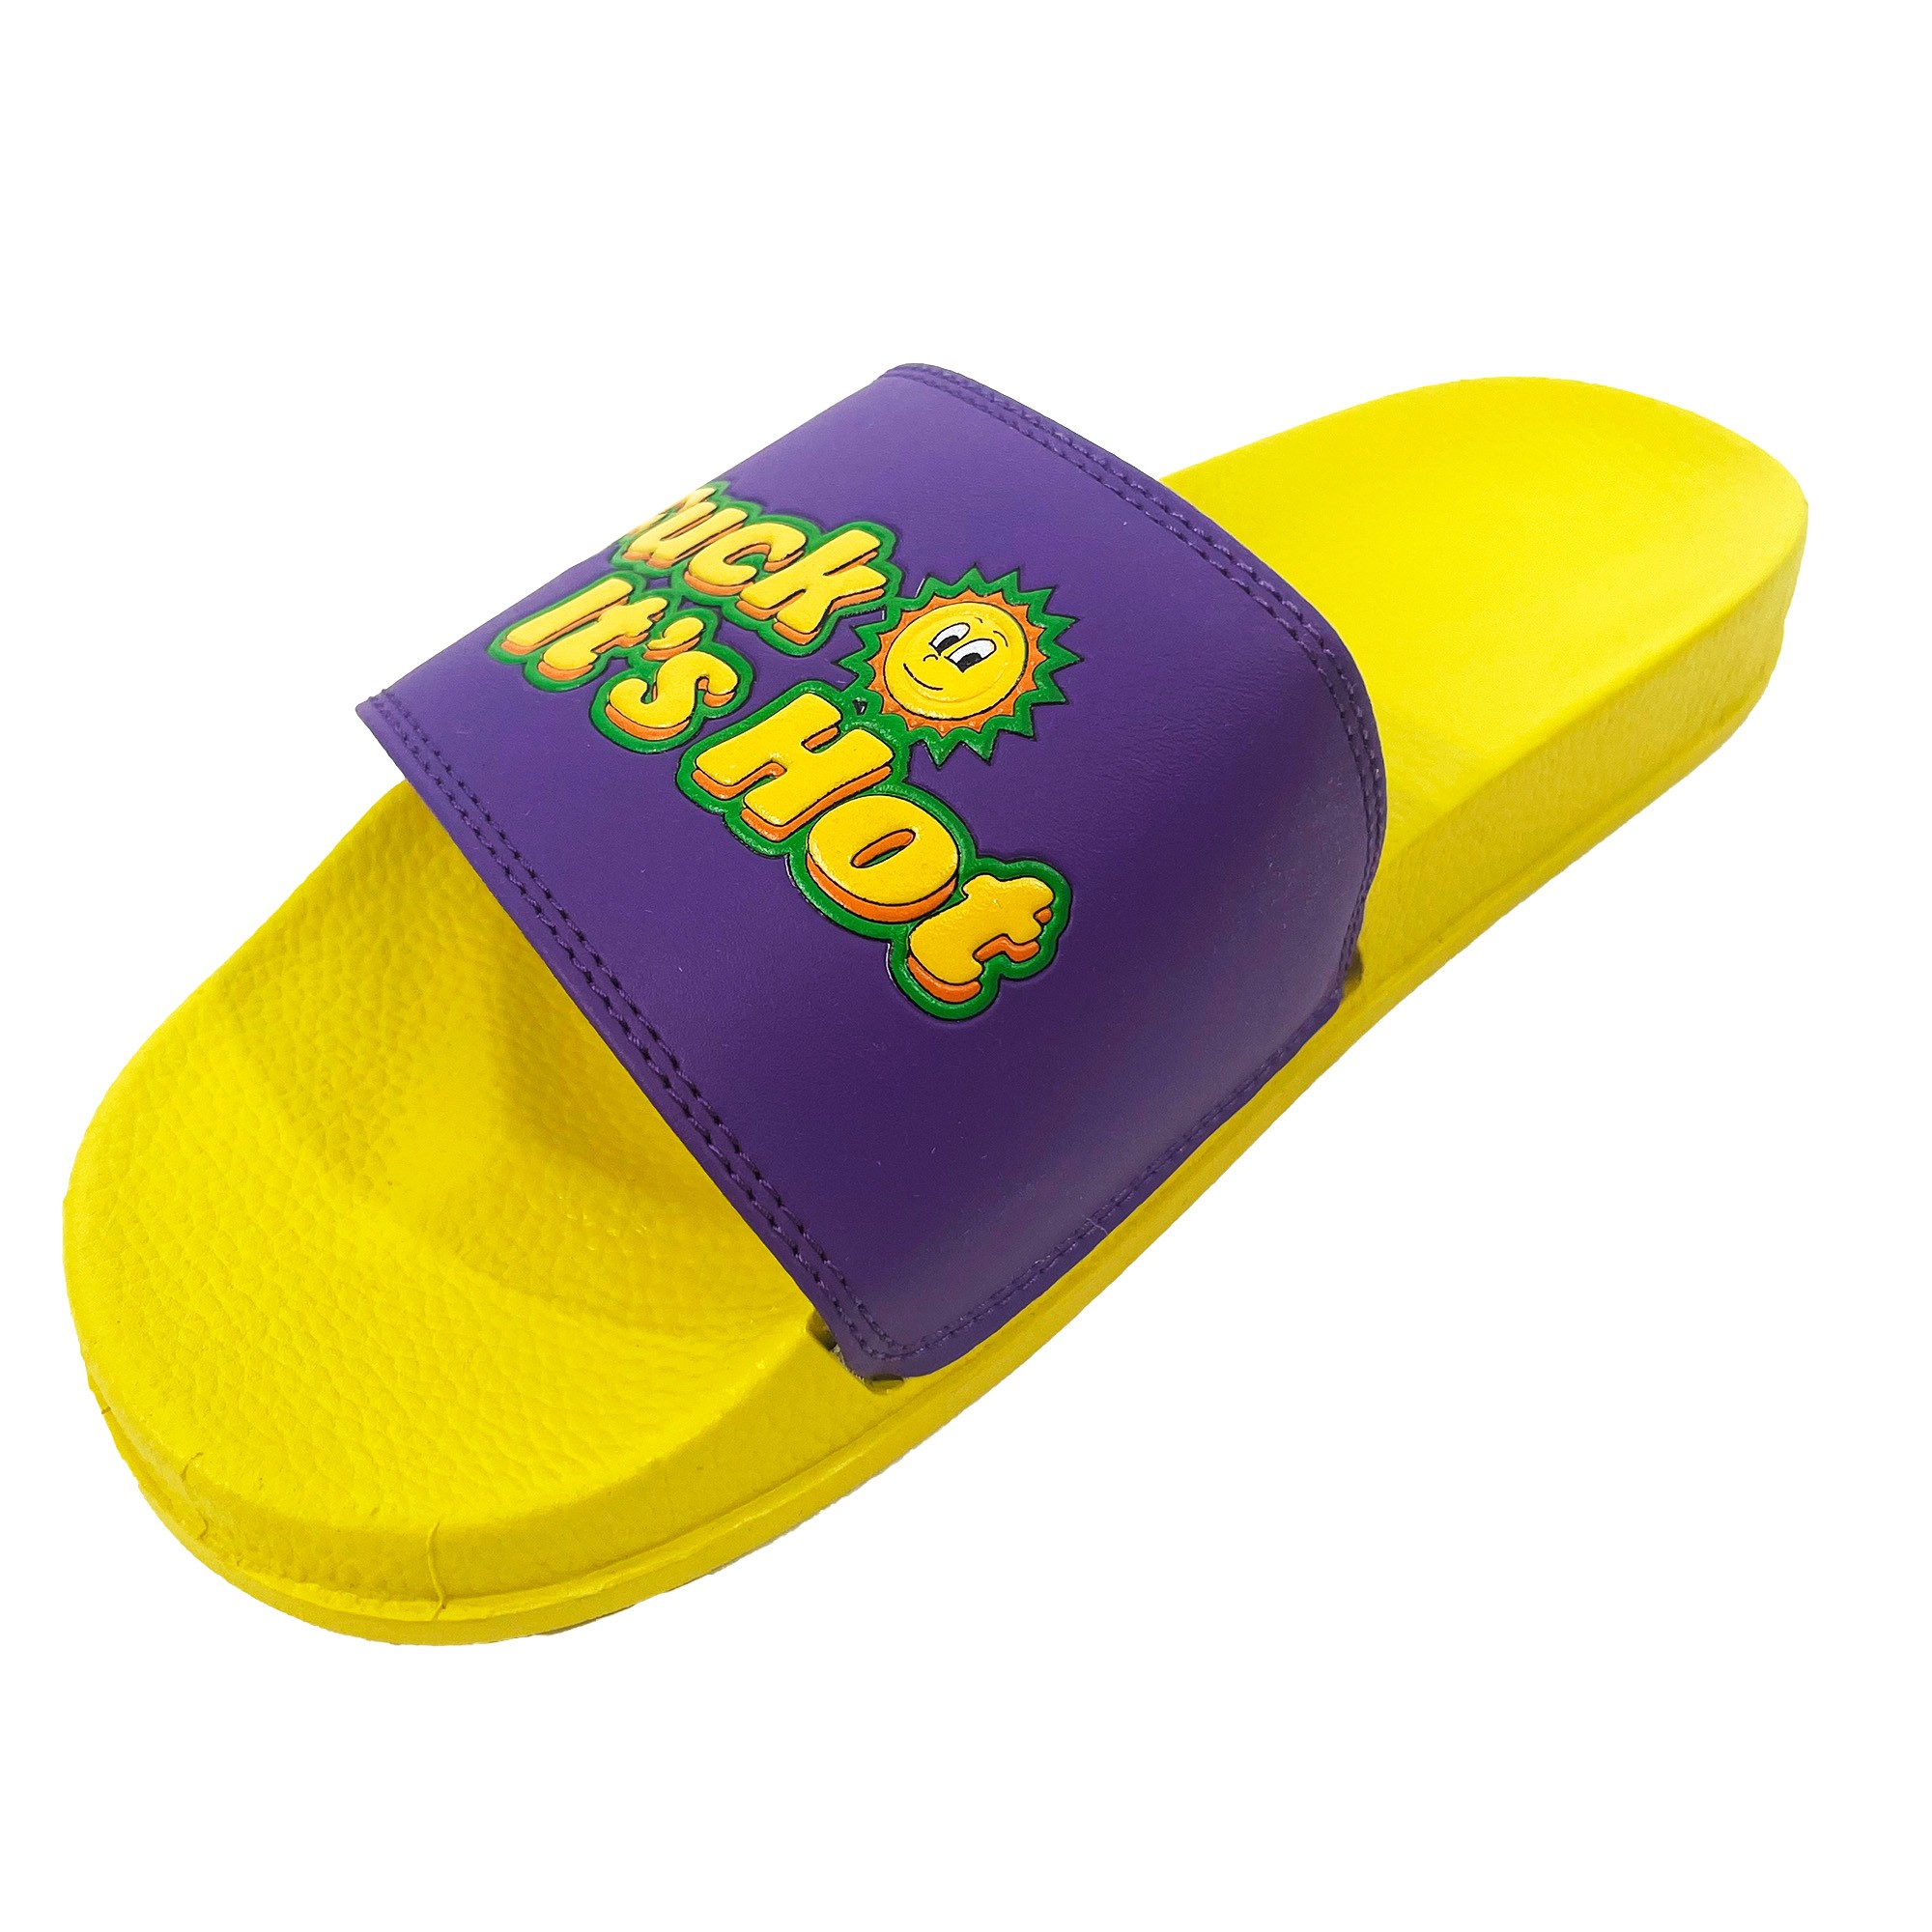 ITS HOT PURPLE AND YELLOW SLIDES